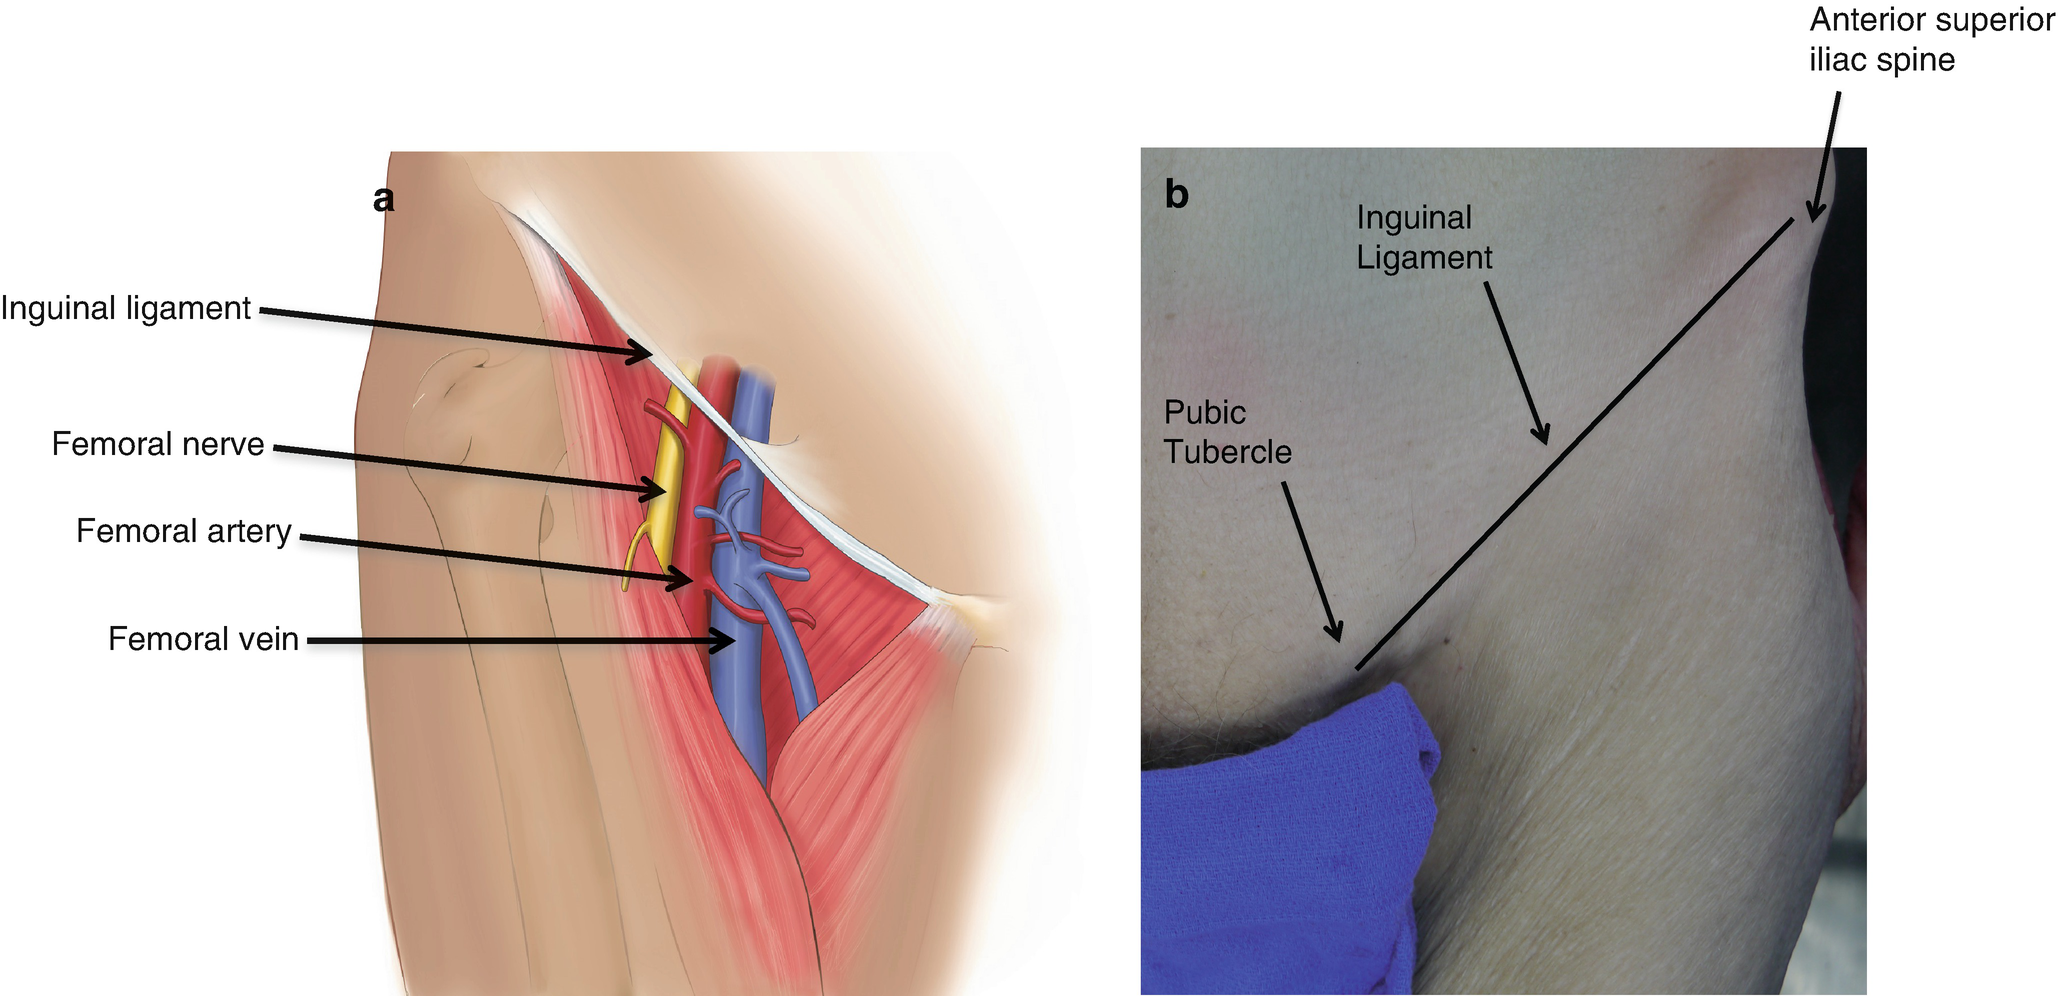 Anatomic landmarks for femoral arterial line or central line placement are....